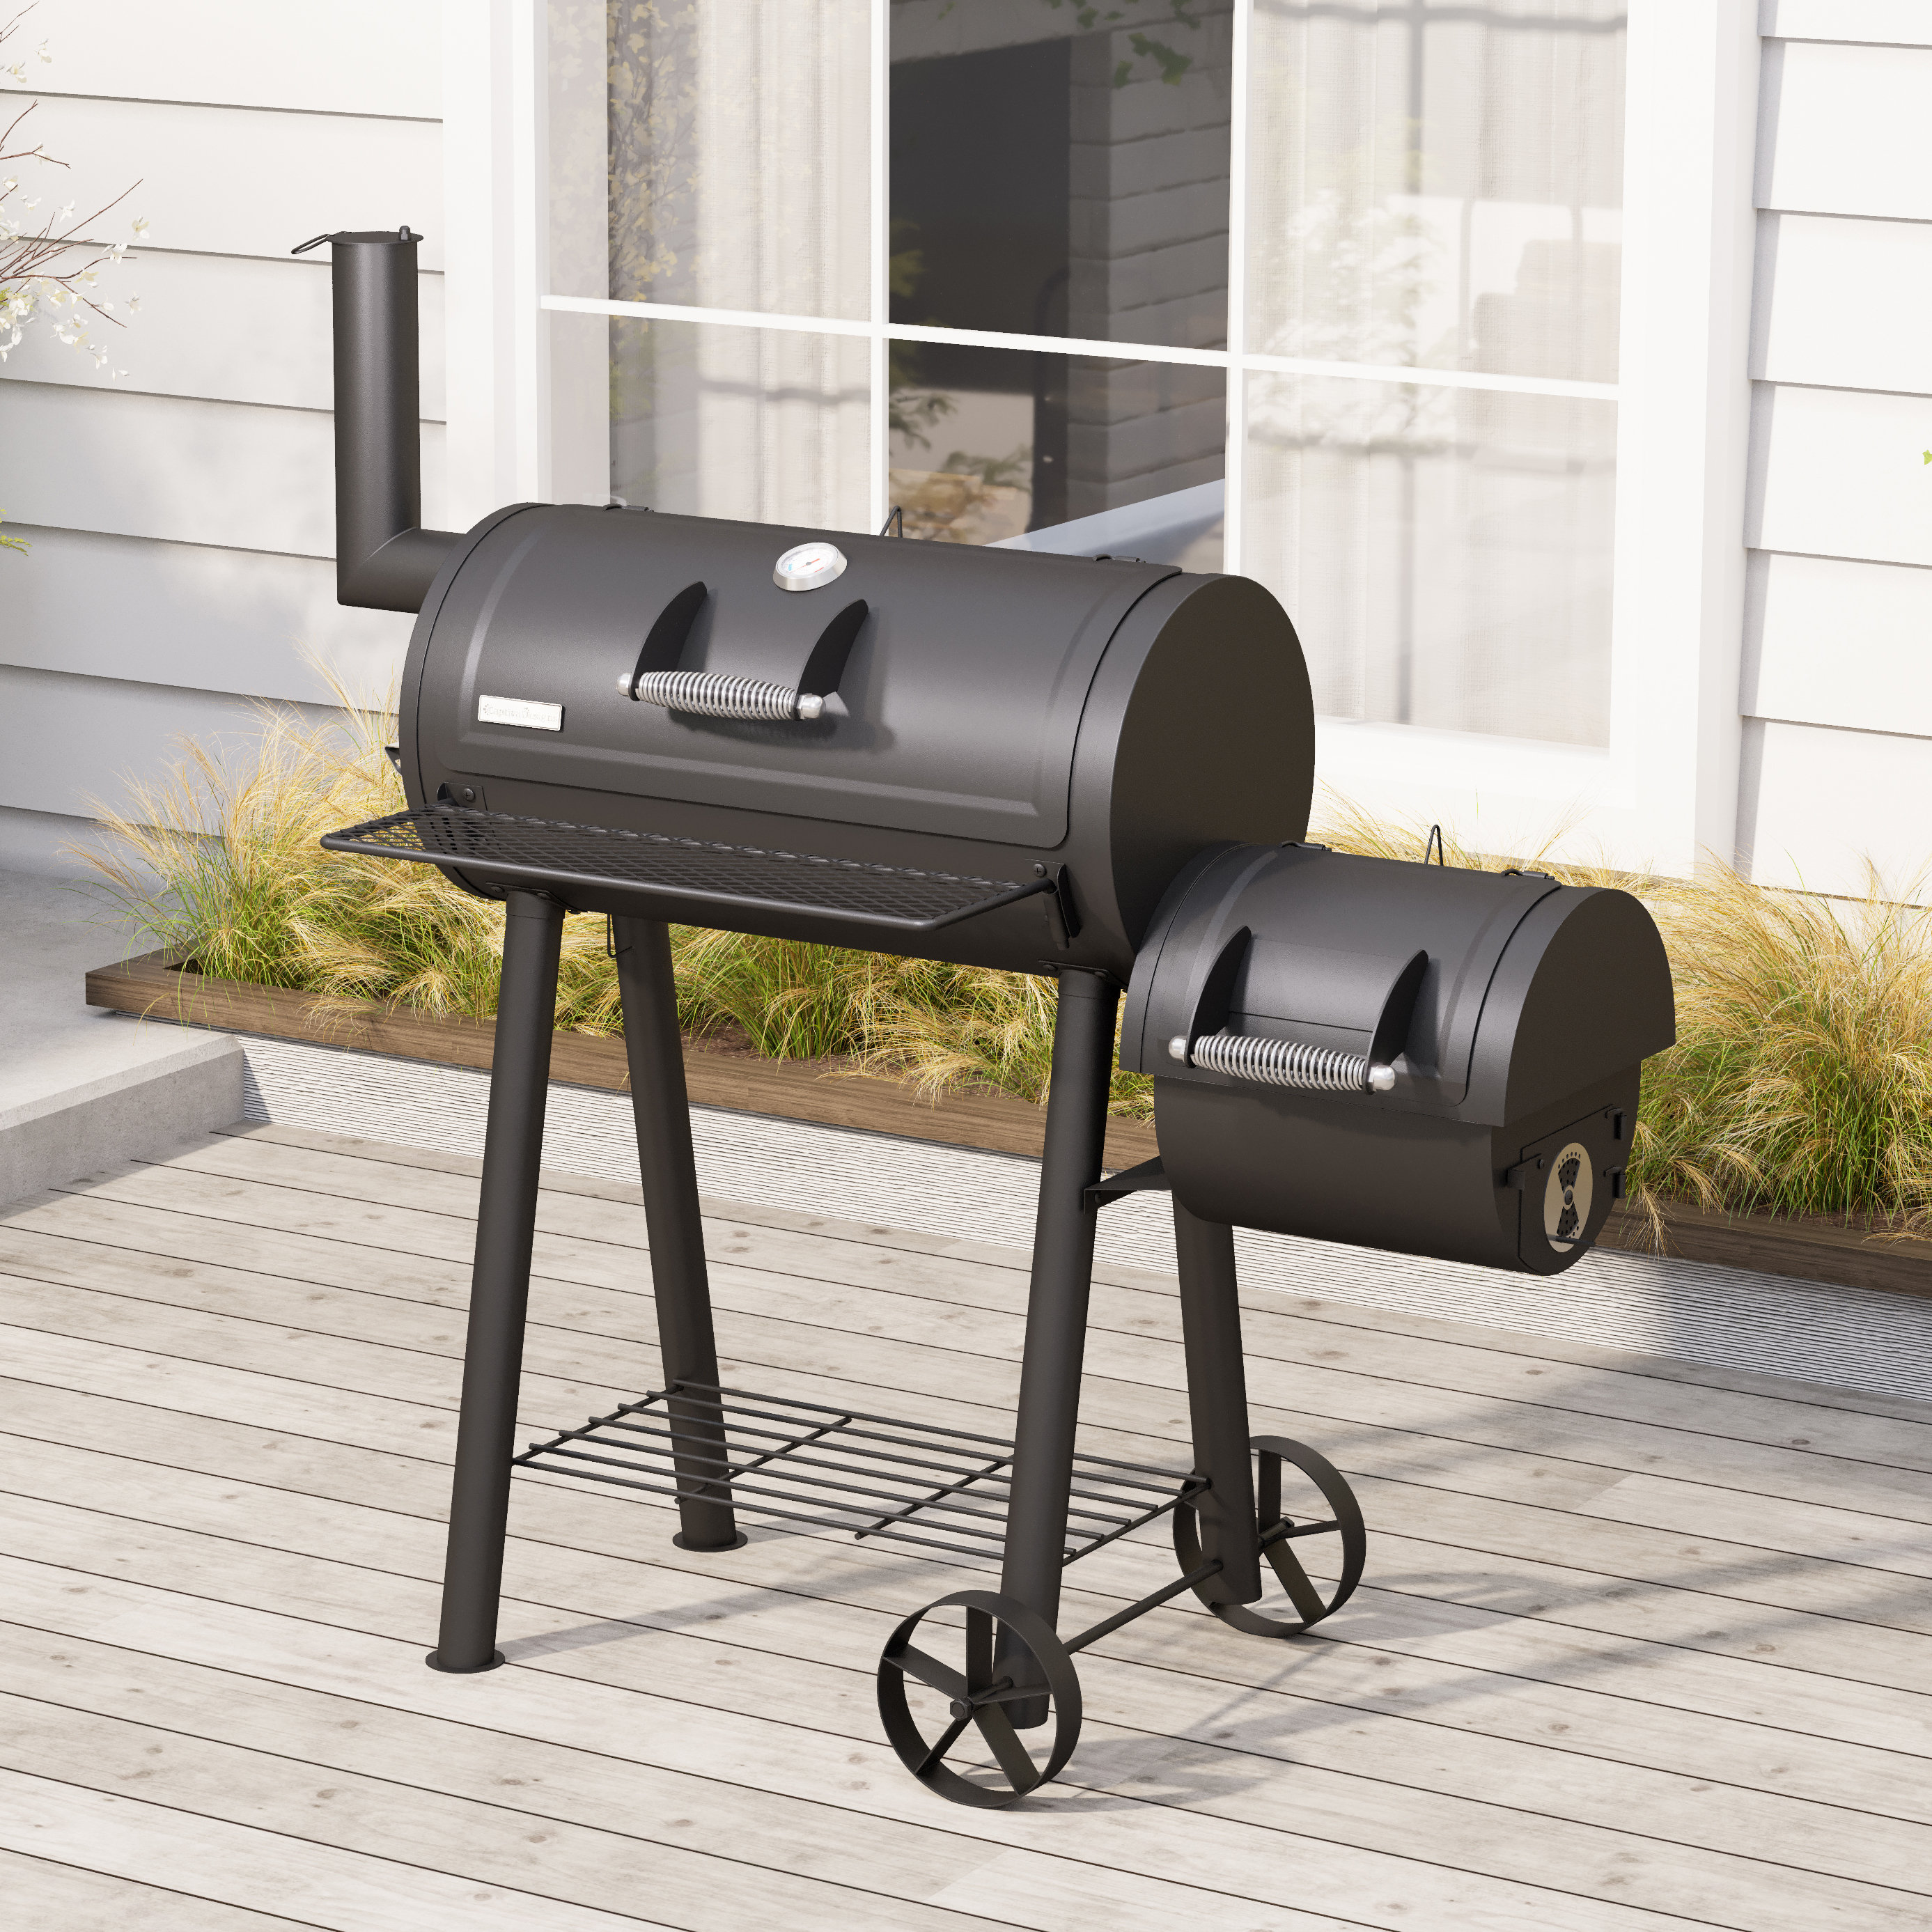 Wayfair 28 Barrel Heavy Duty Charcoal Grill with Offset Smoker